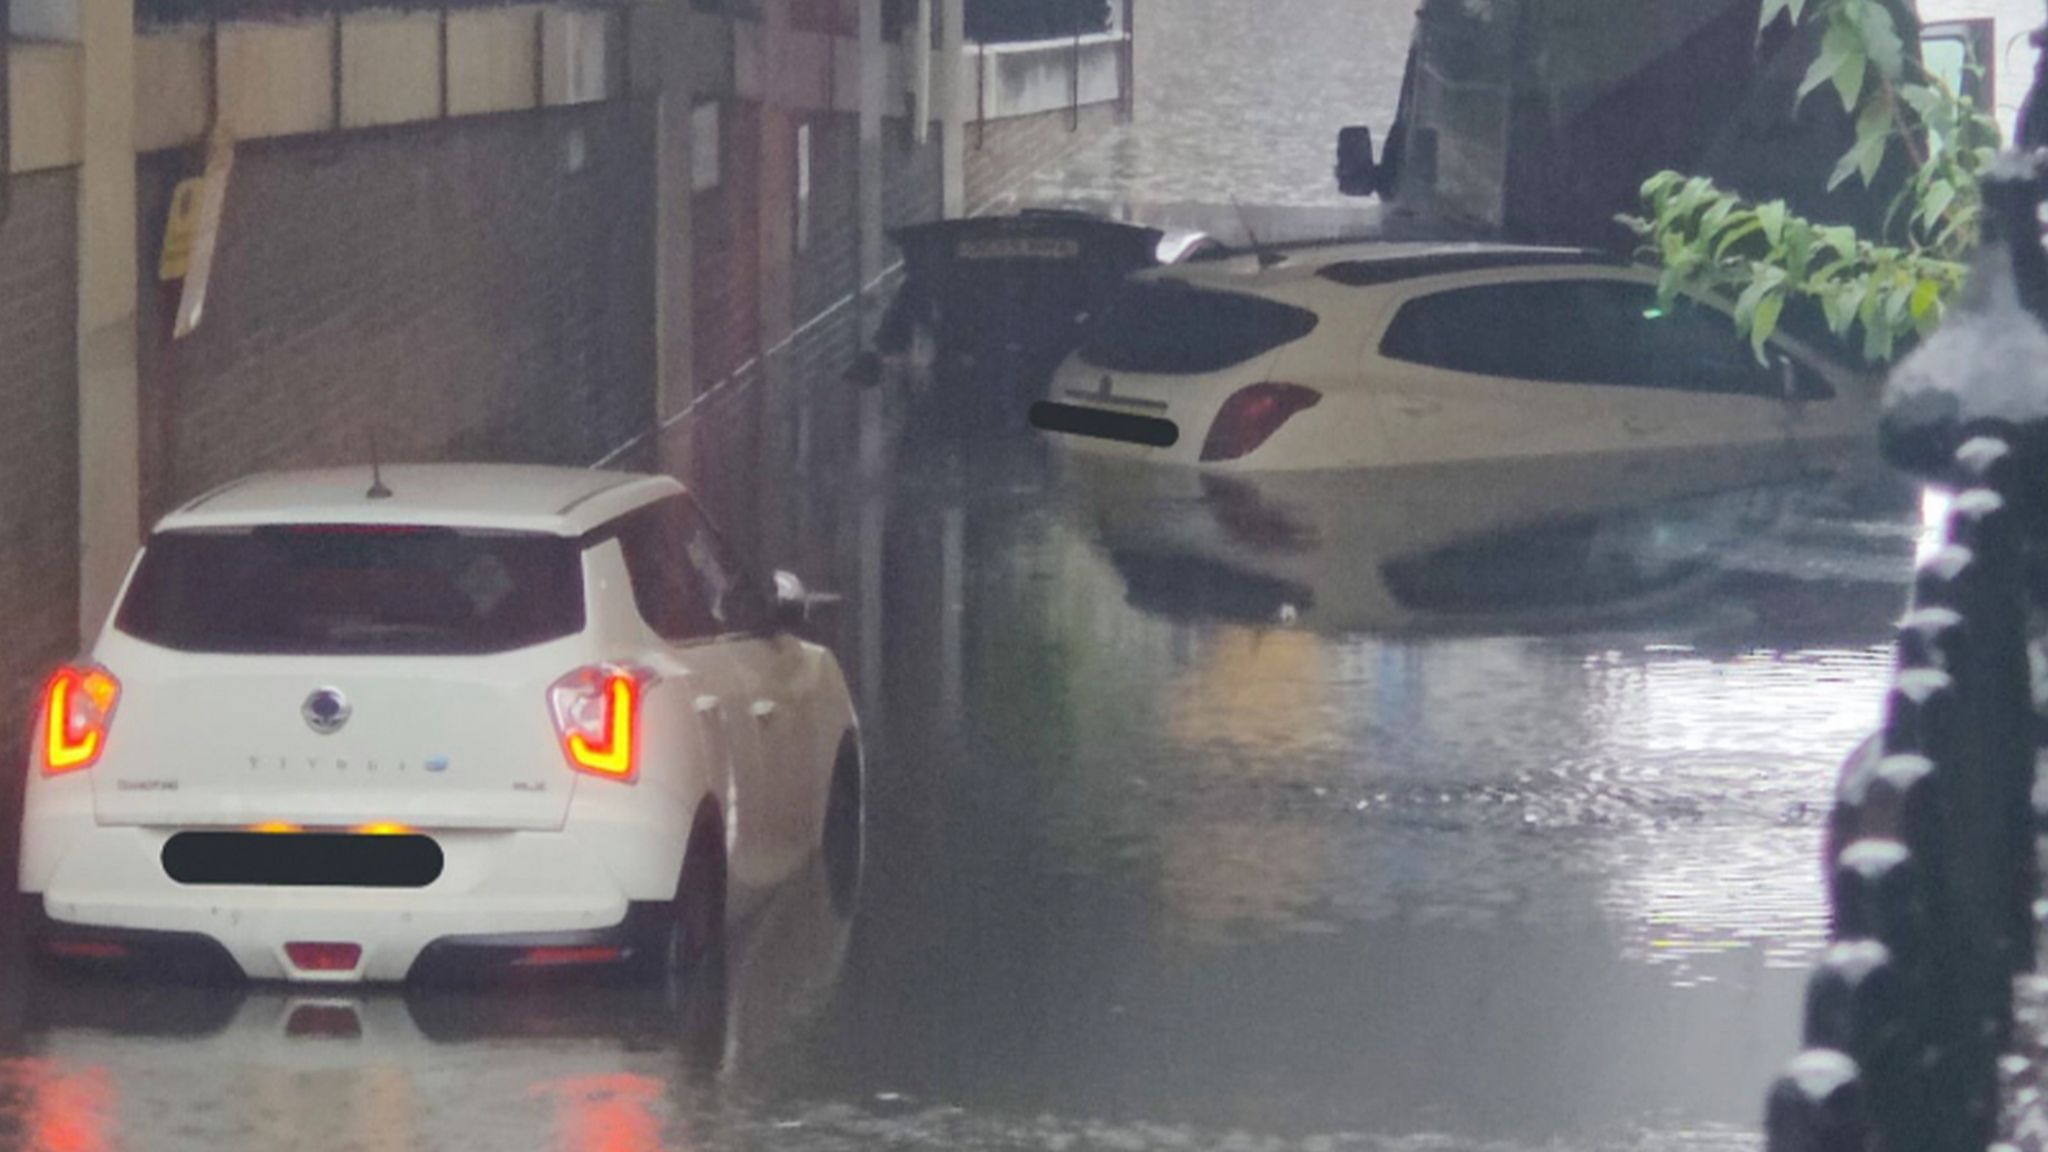 Cars stranded in the road due to flooding